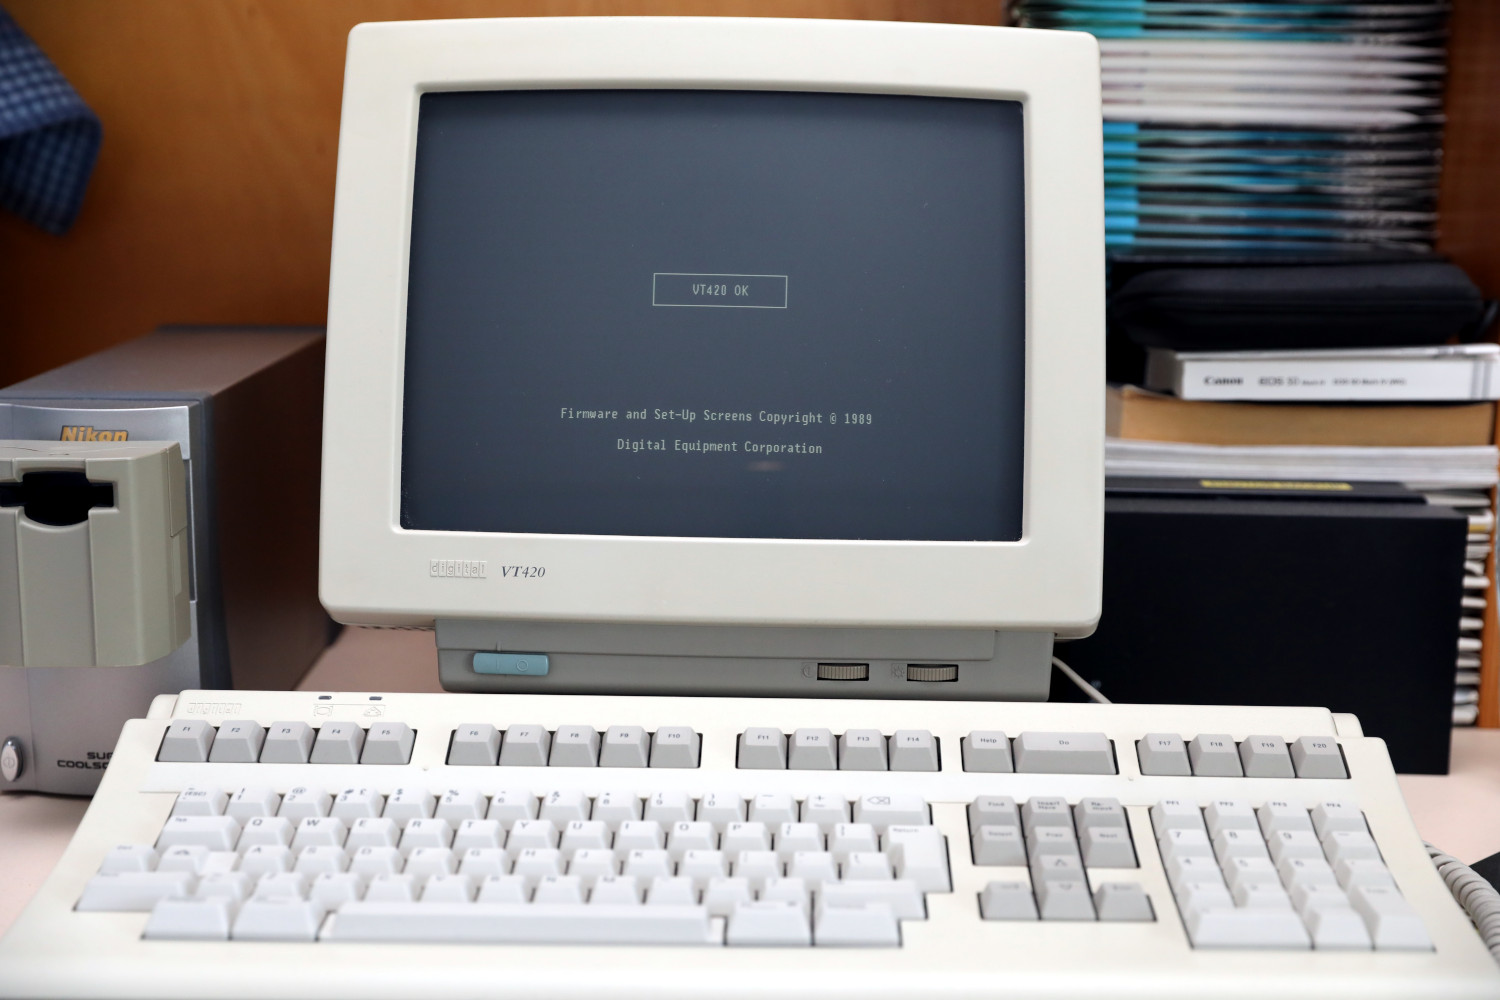 The DEC VT420 terminal starting up — note the copyright date on the screen